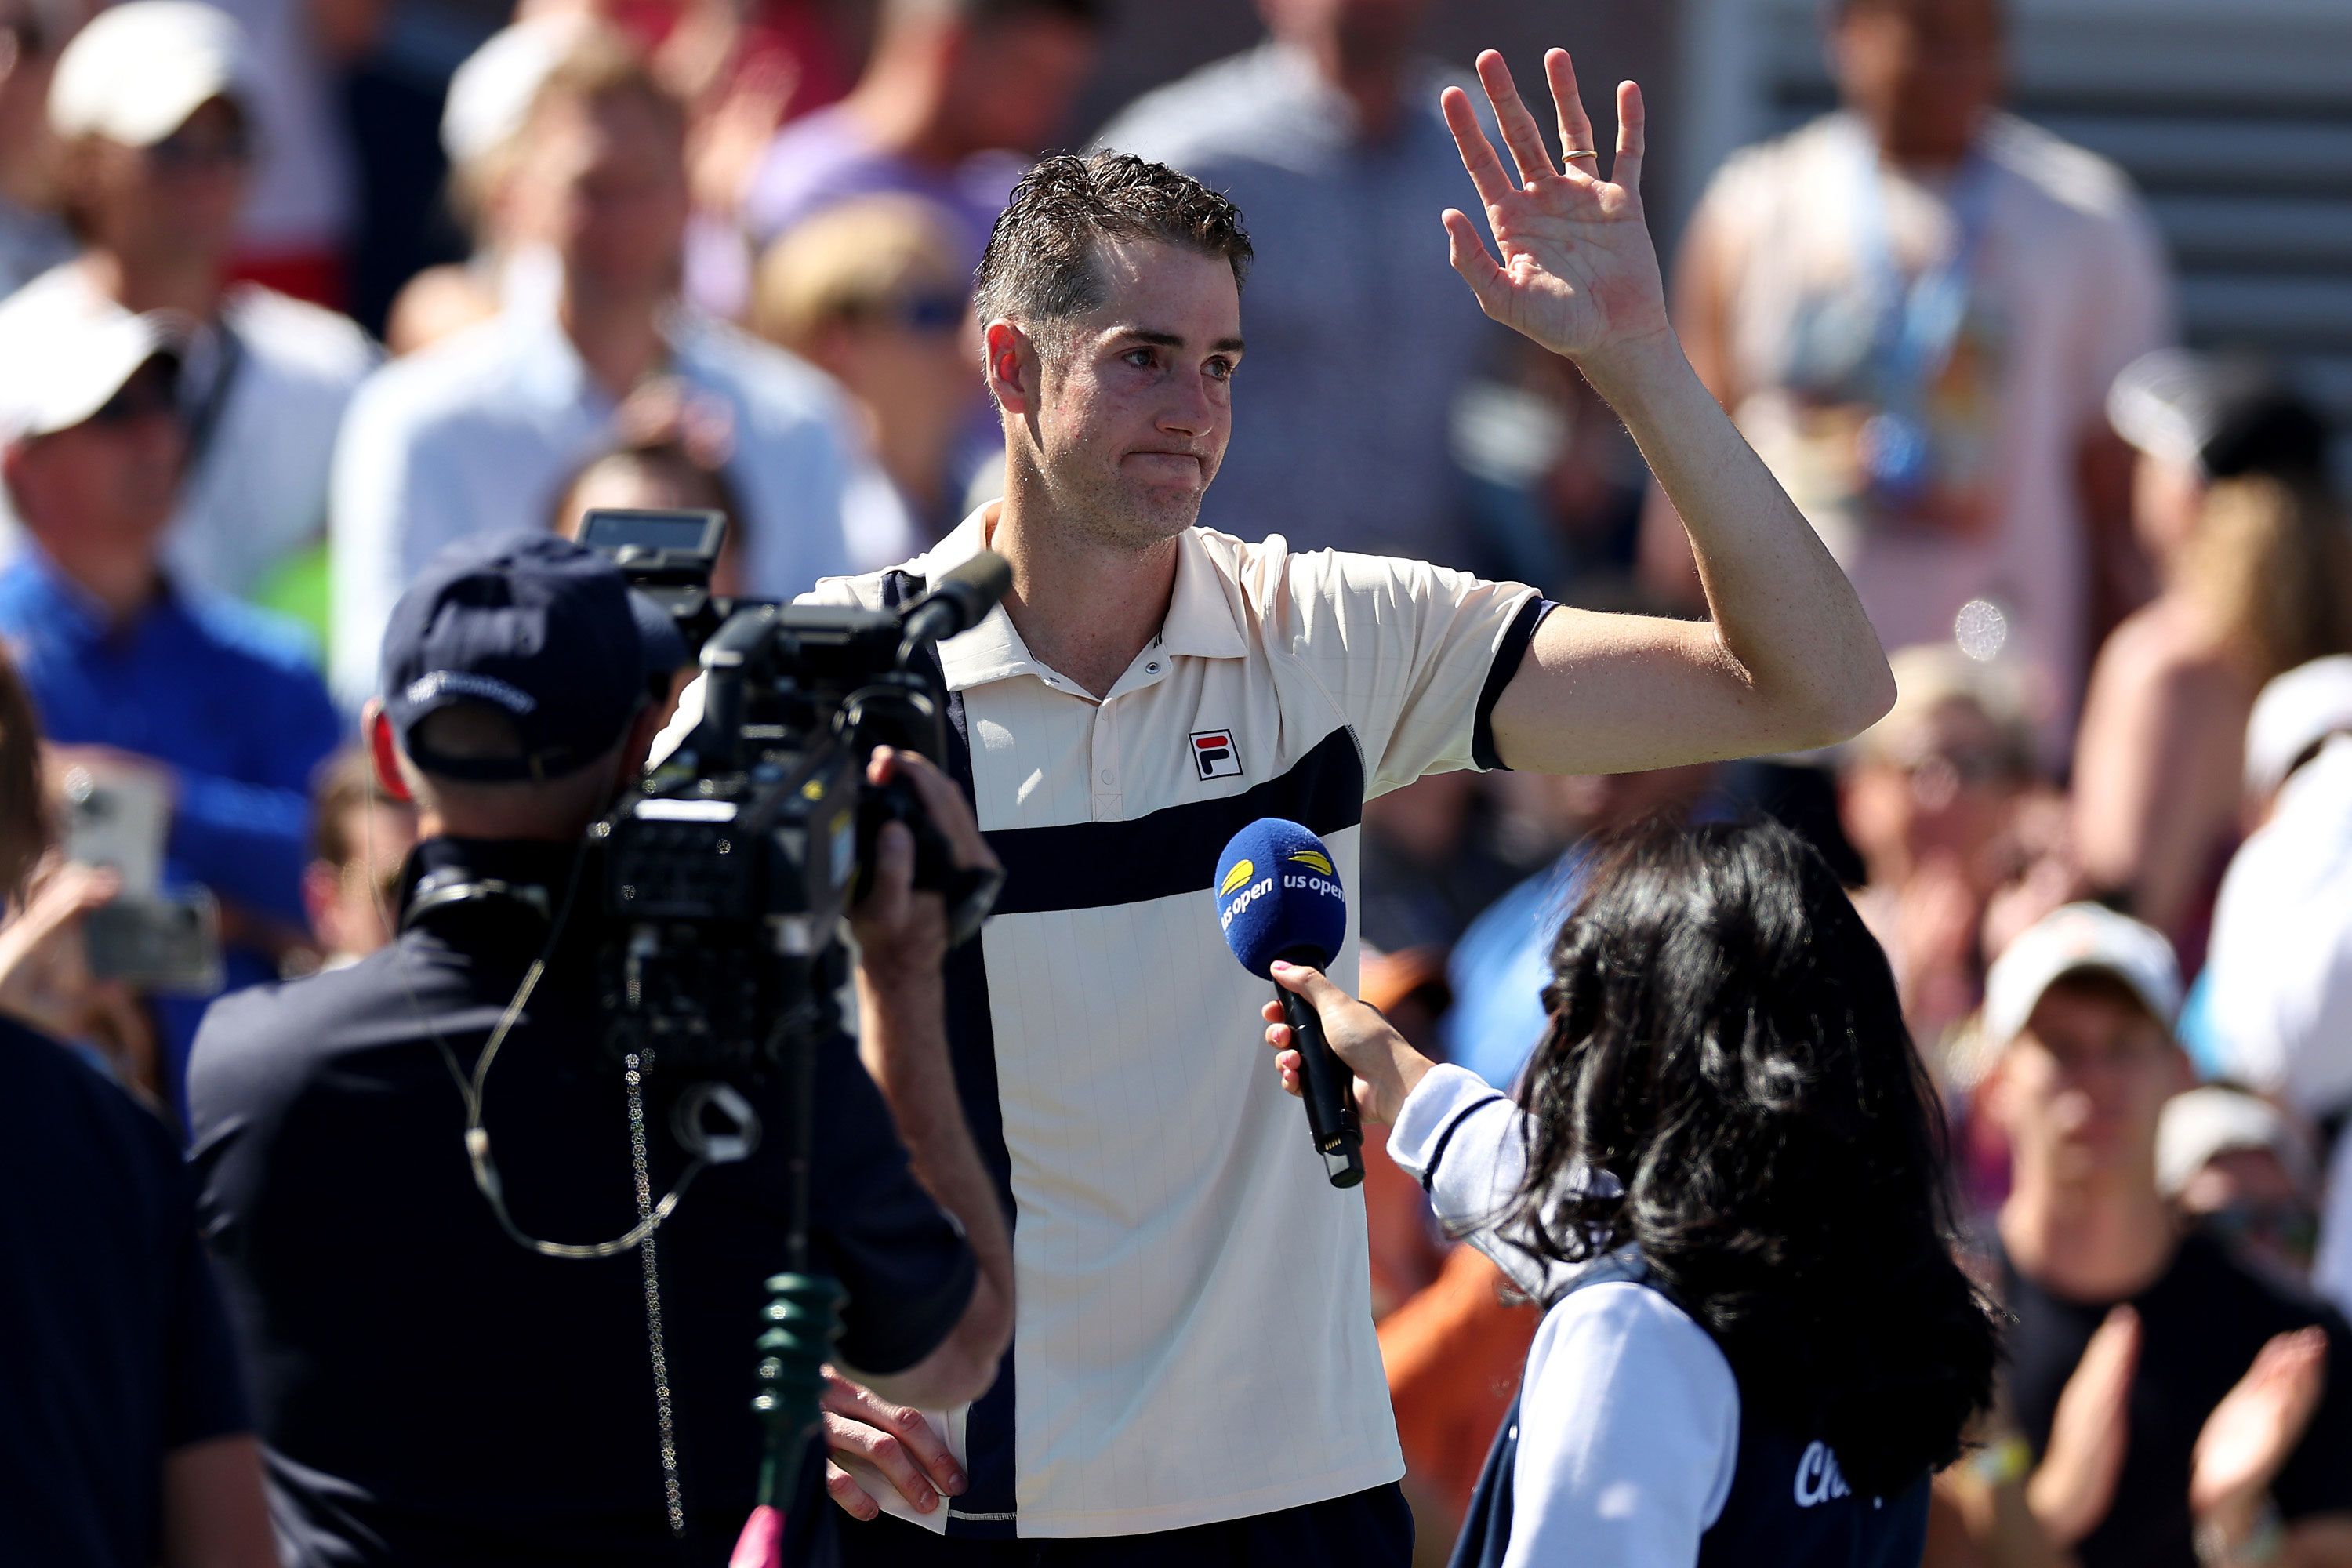 US Open: John Isner bids farewell to singles tennis after losing to Michael Mmoh in five-set thriller | CNN